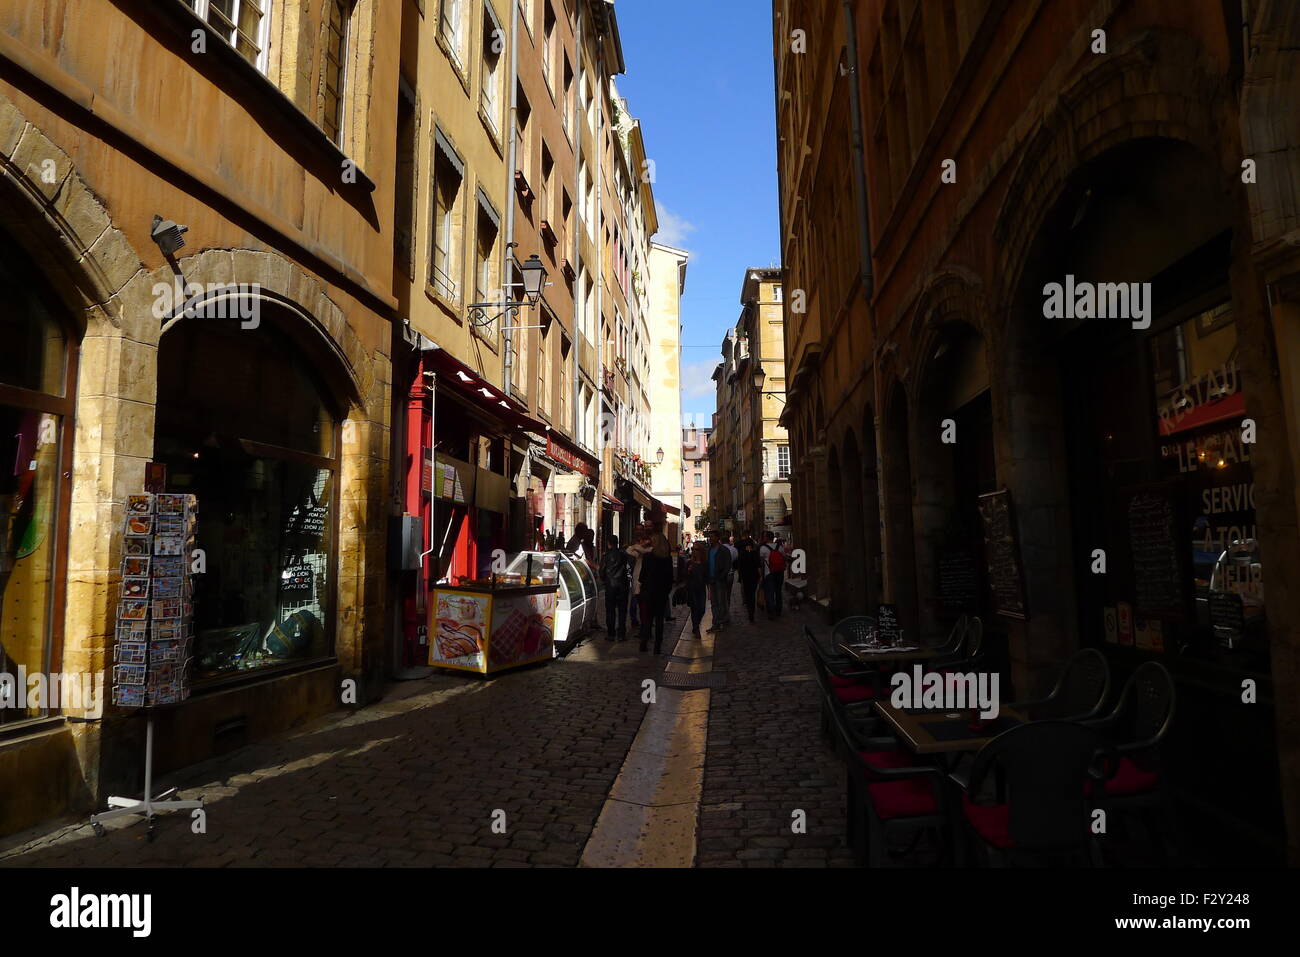 An Alley at Old City of Lyon, France Stock Photo